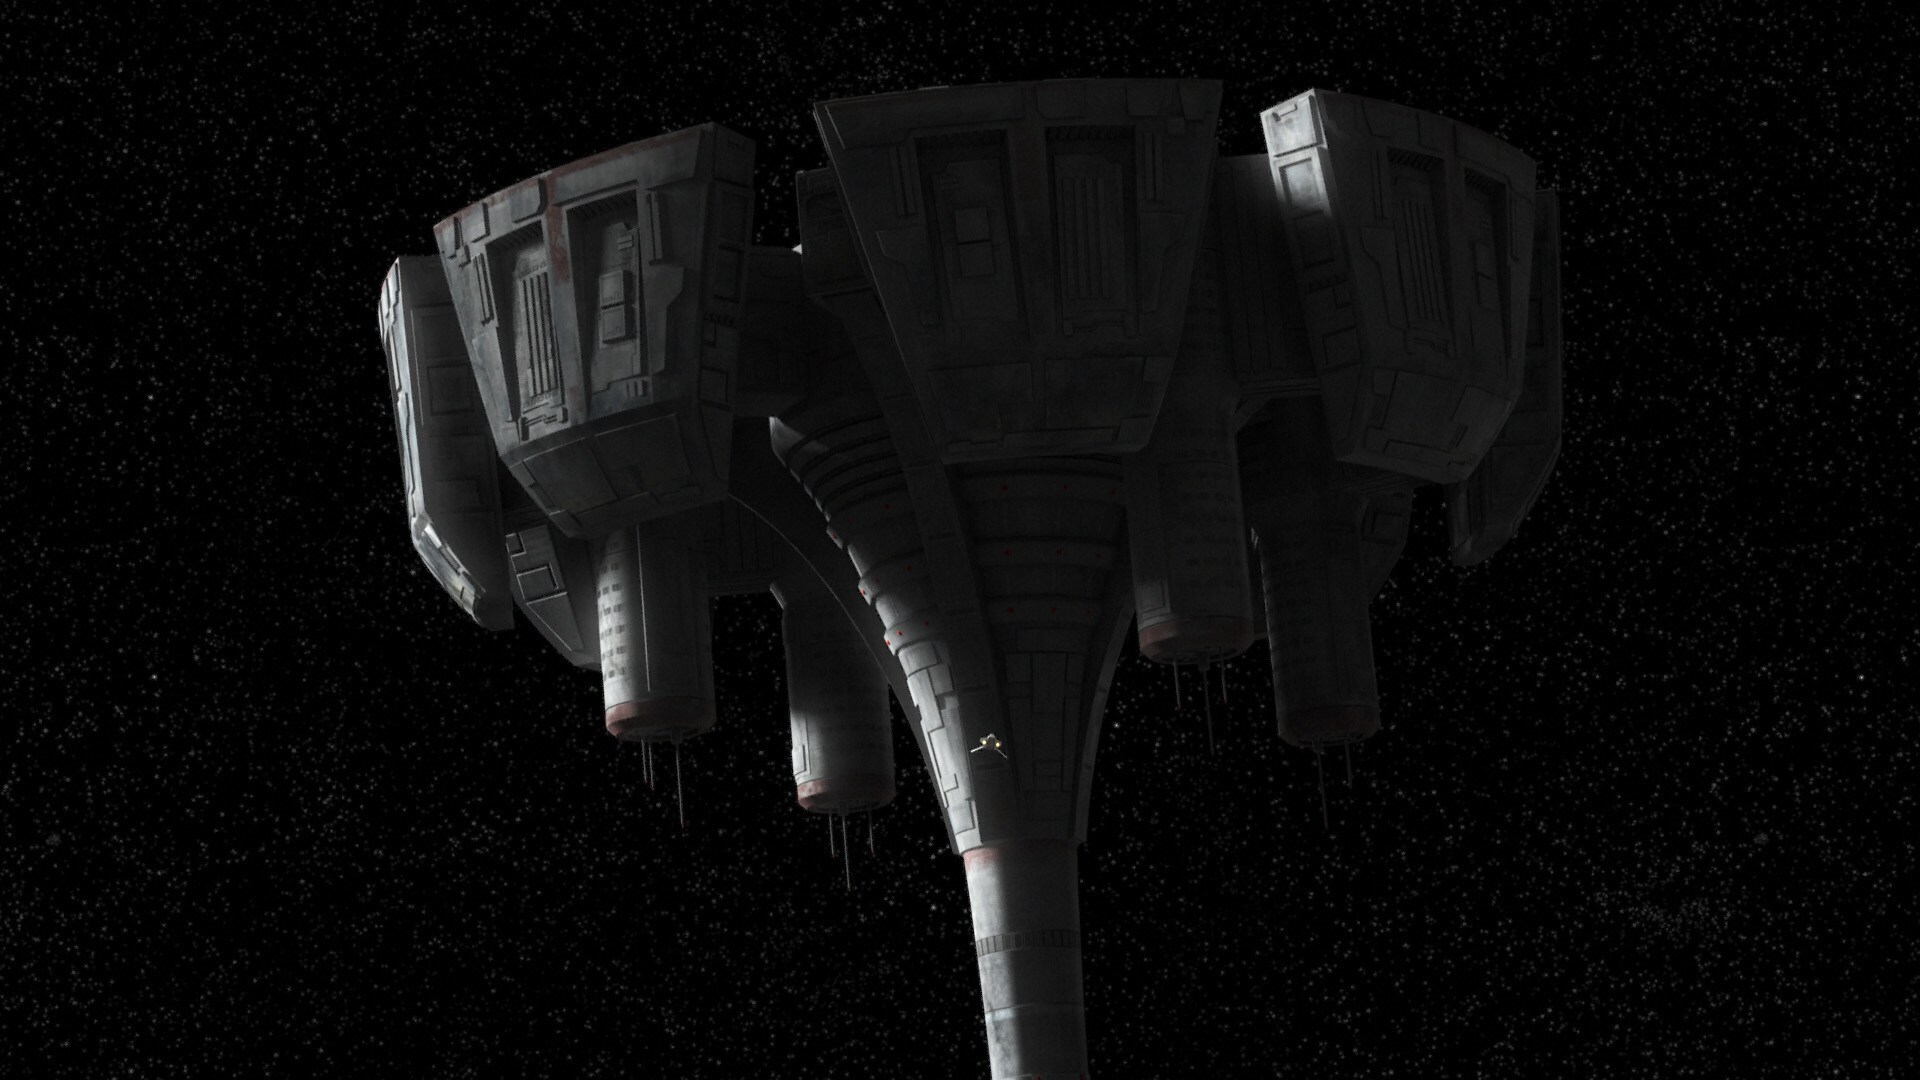 They arrive at the base, an old Republic medical station abandoned after the Clone Wars, and enter.